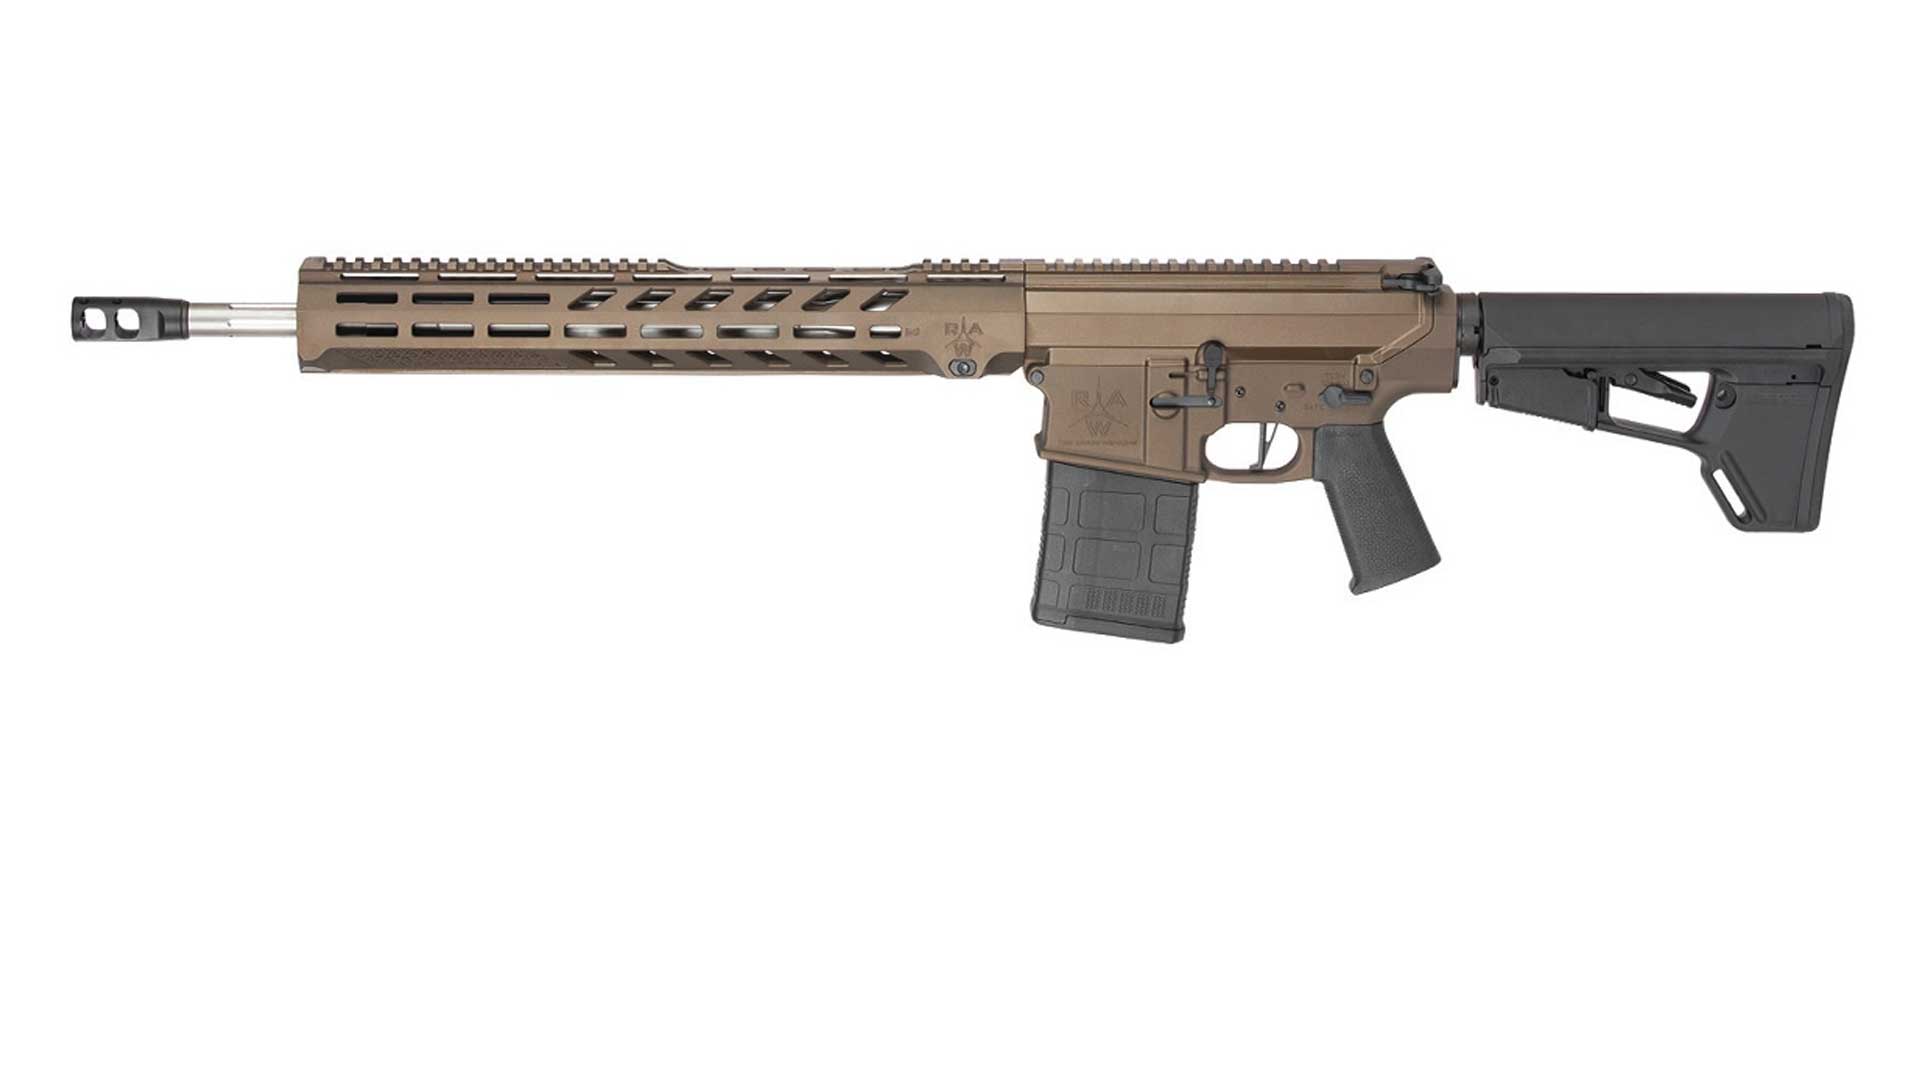 Big-Bore AR Rifles for Survival | An Official Journal Of The NRA